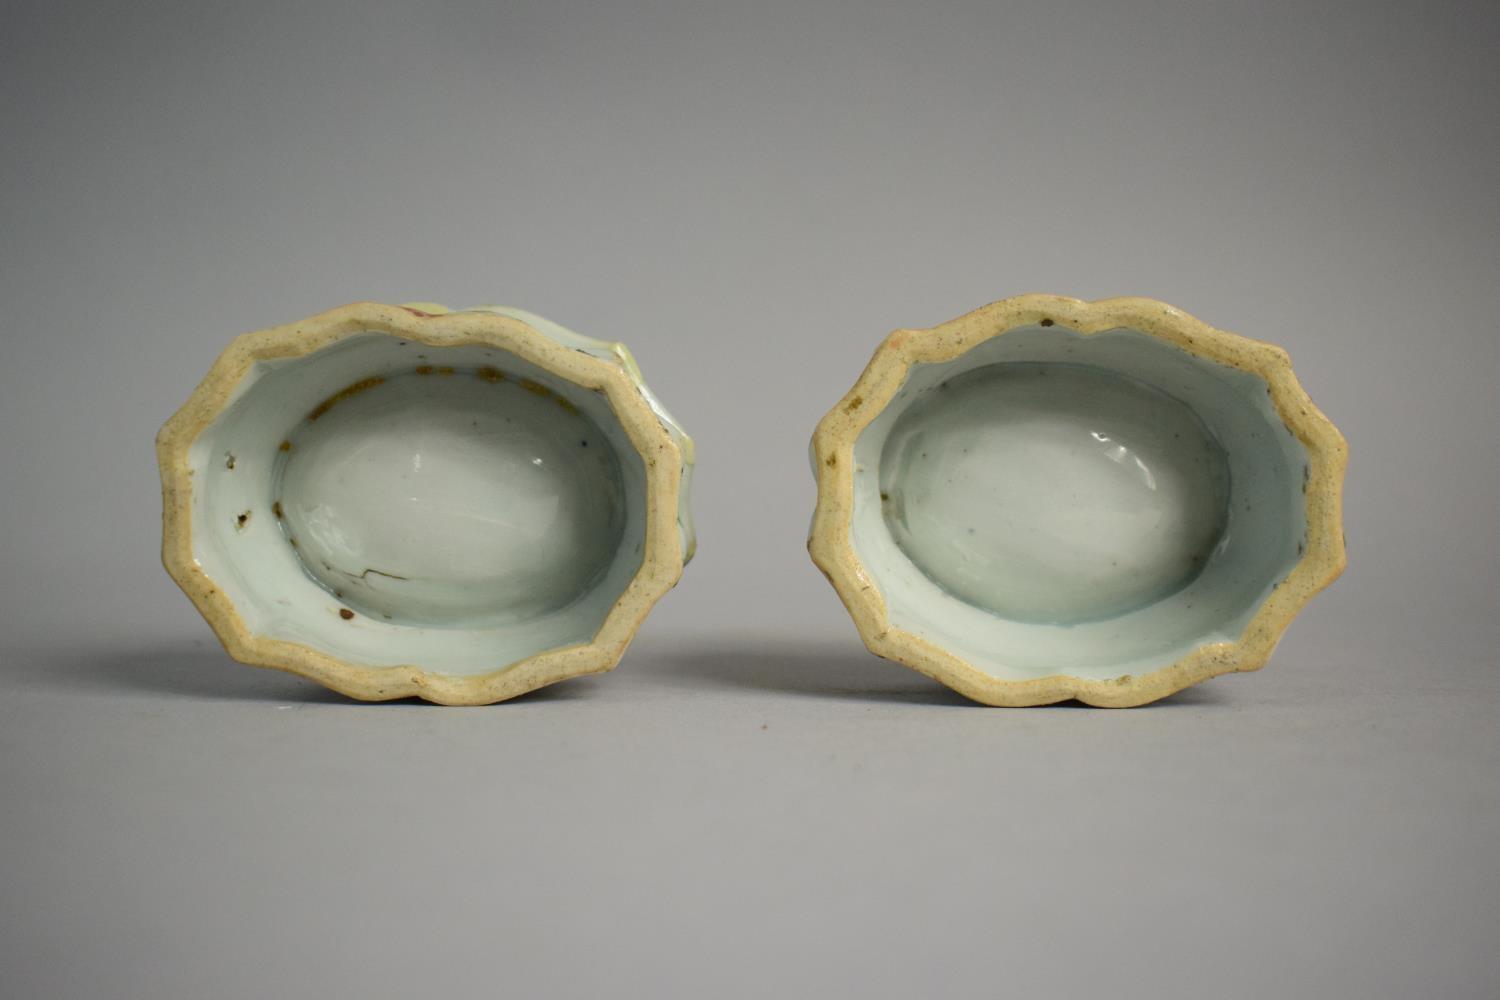 A Pair of Early Chinese Glazed Stoneware Salts decorated with Flowers and Blue and White Border. - Image 2 of 4